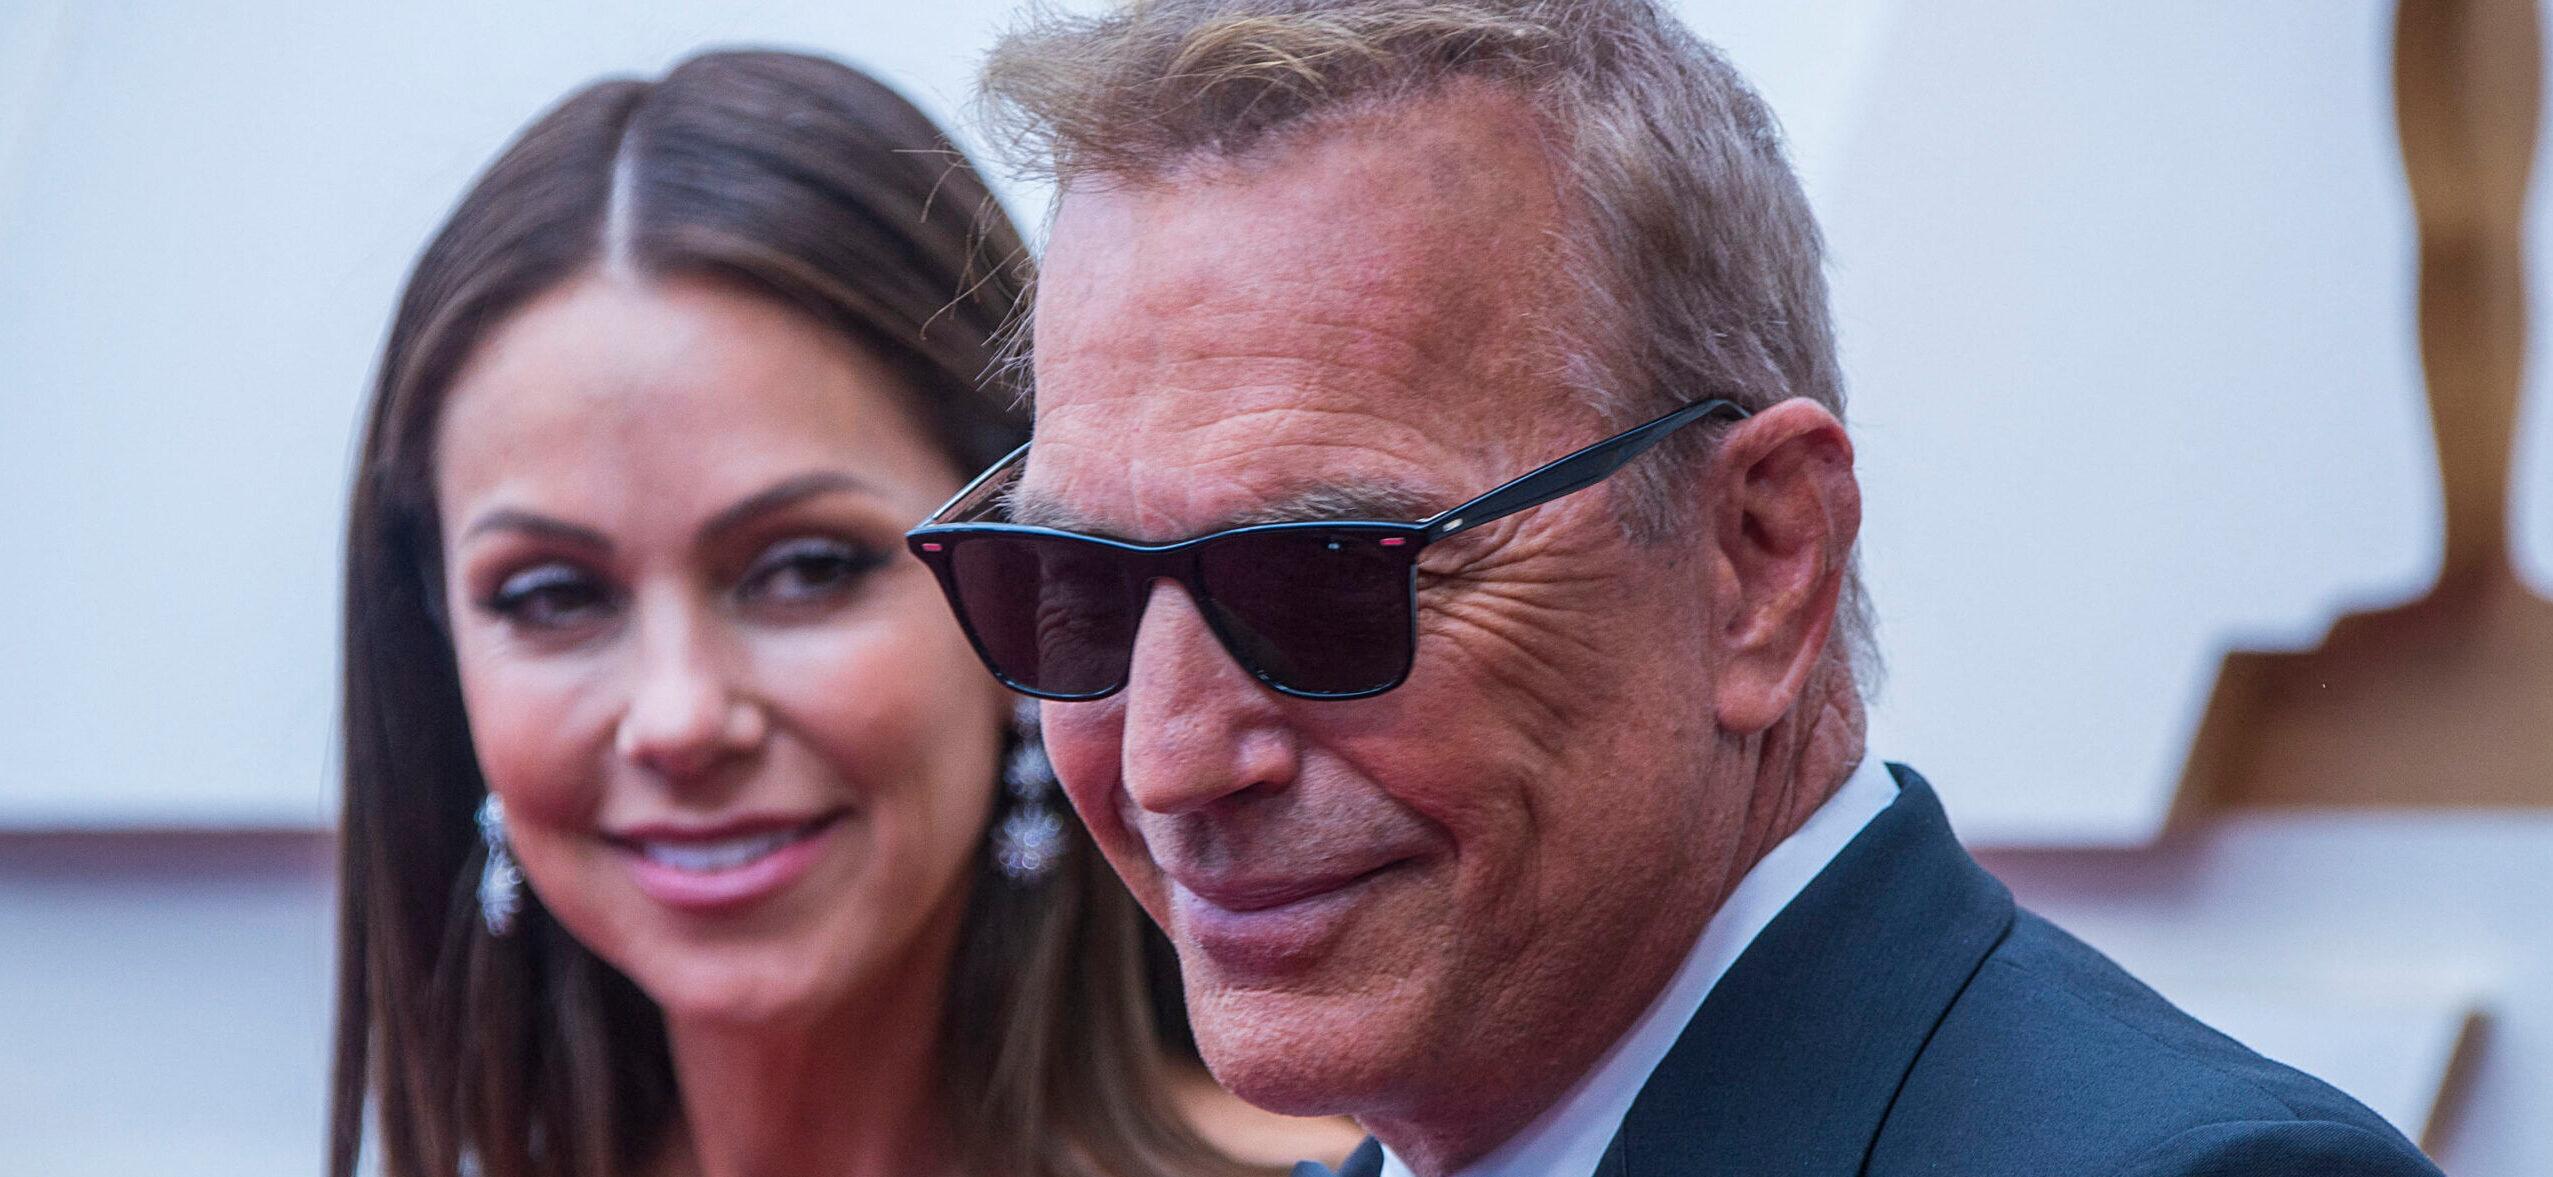 Kevin Costner Wants His Legal Fees Covered By Estranged Wife